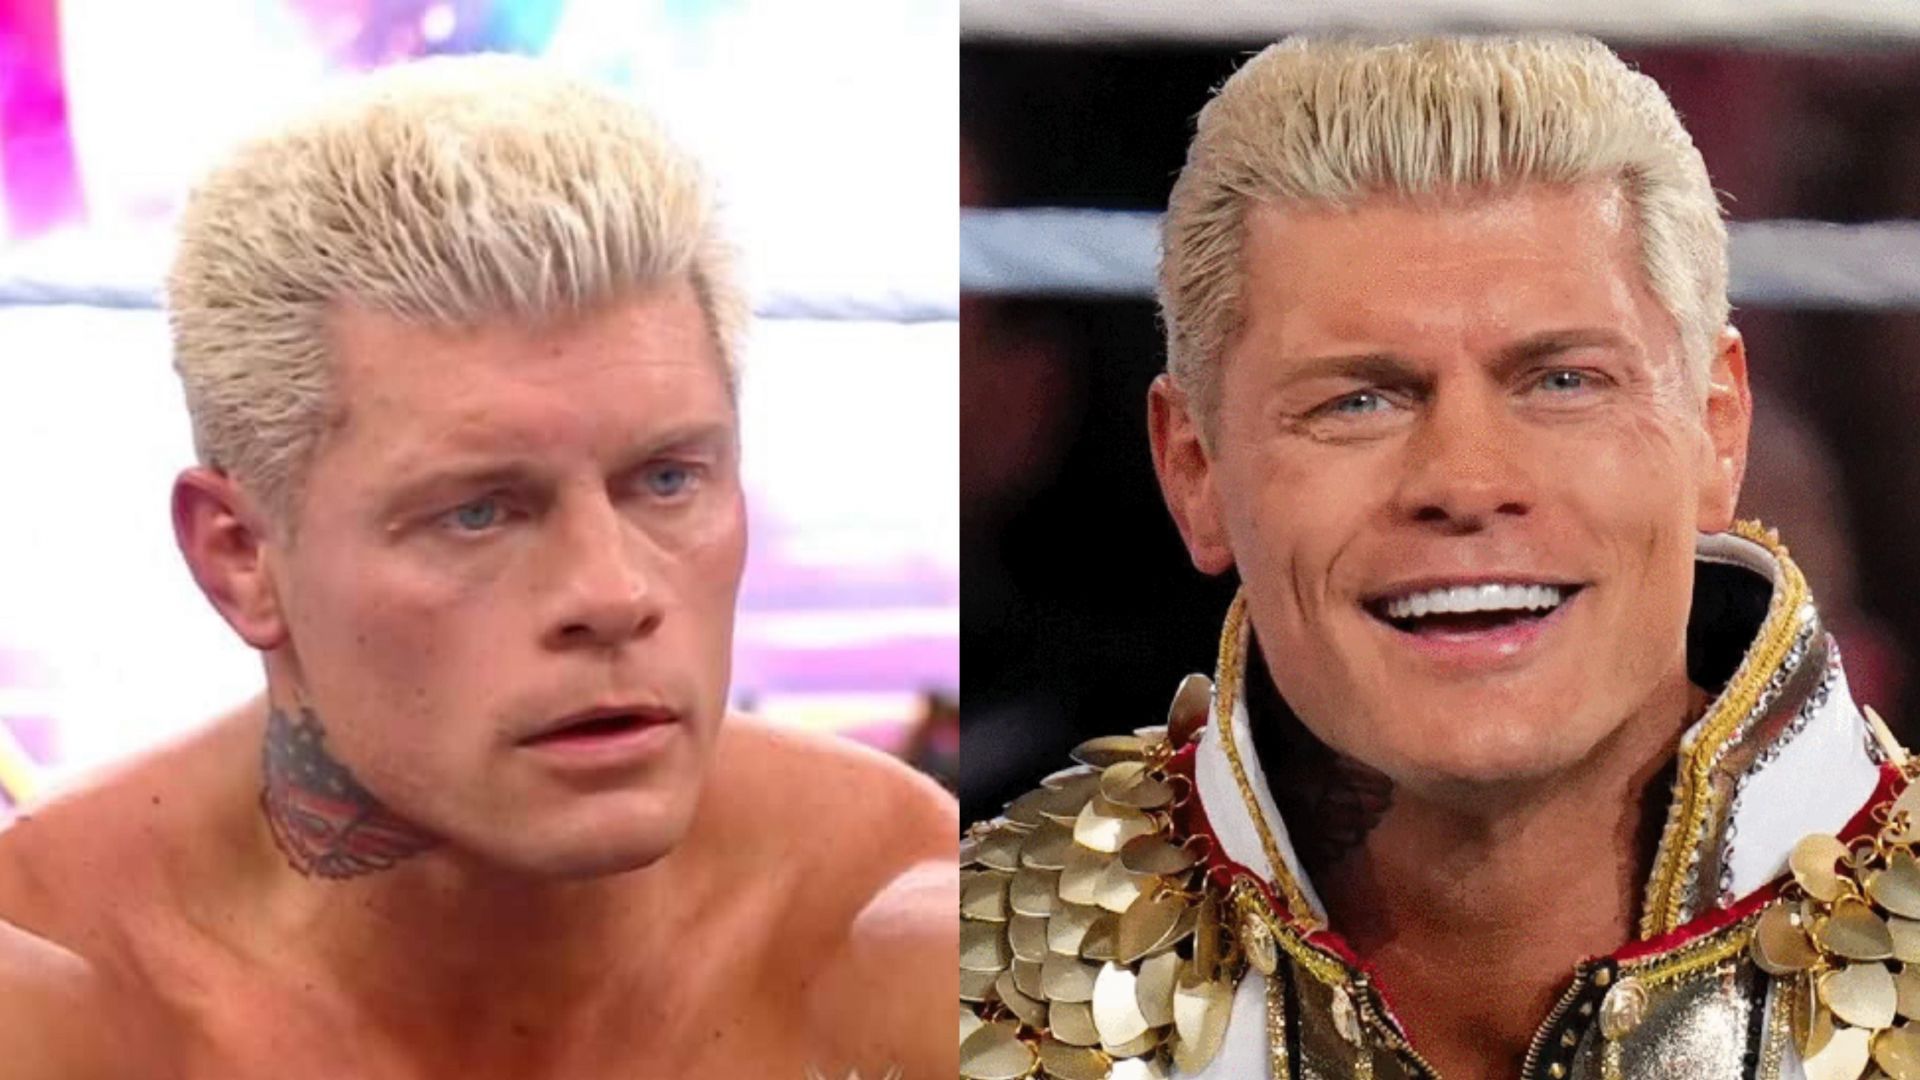 Cody Rhodes lost the main event of WrestleMania 39 against Roman Reigns.